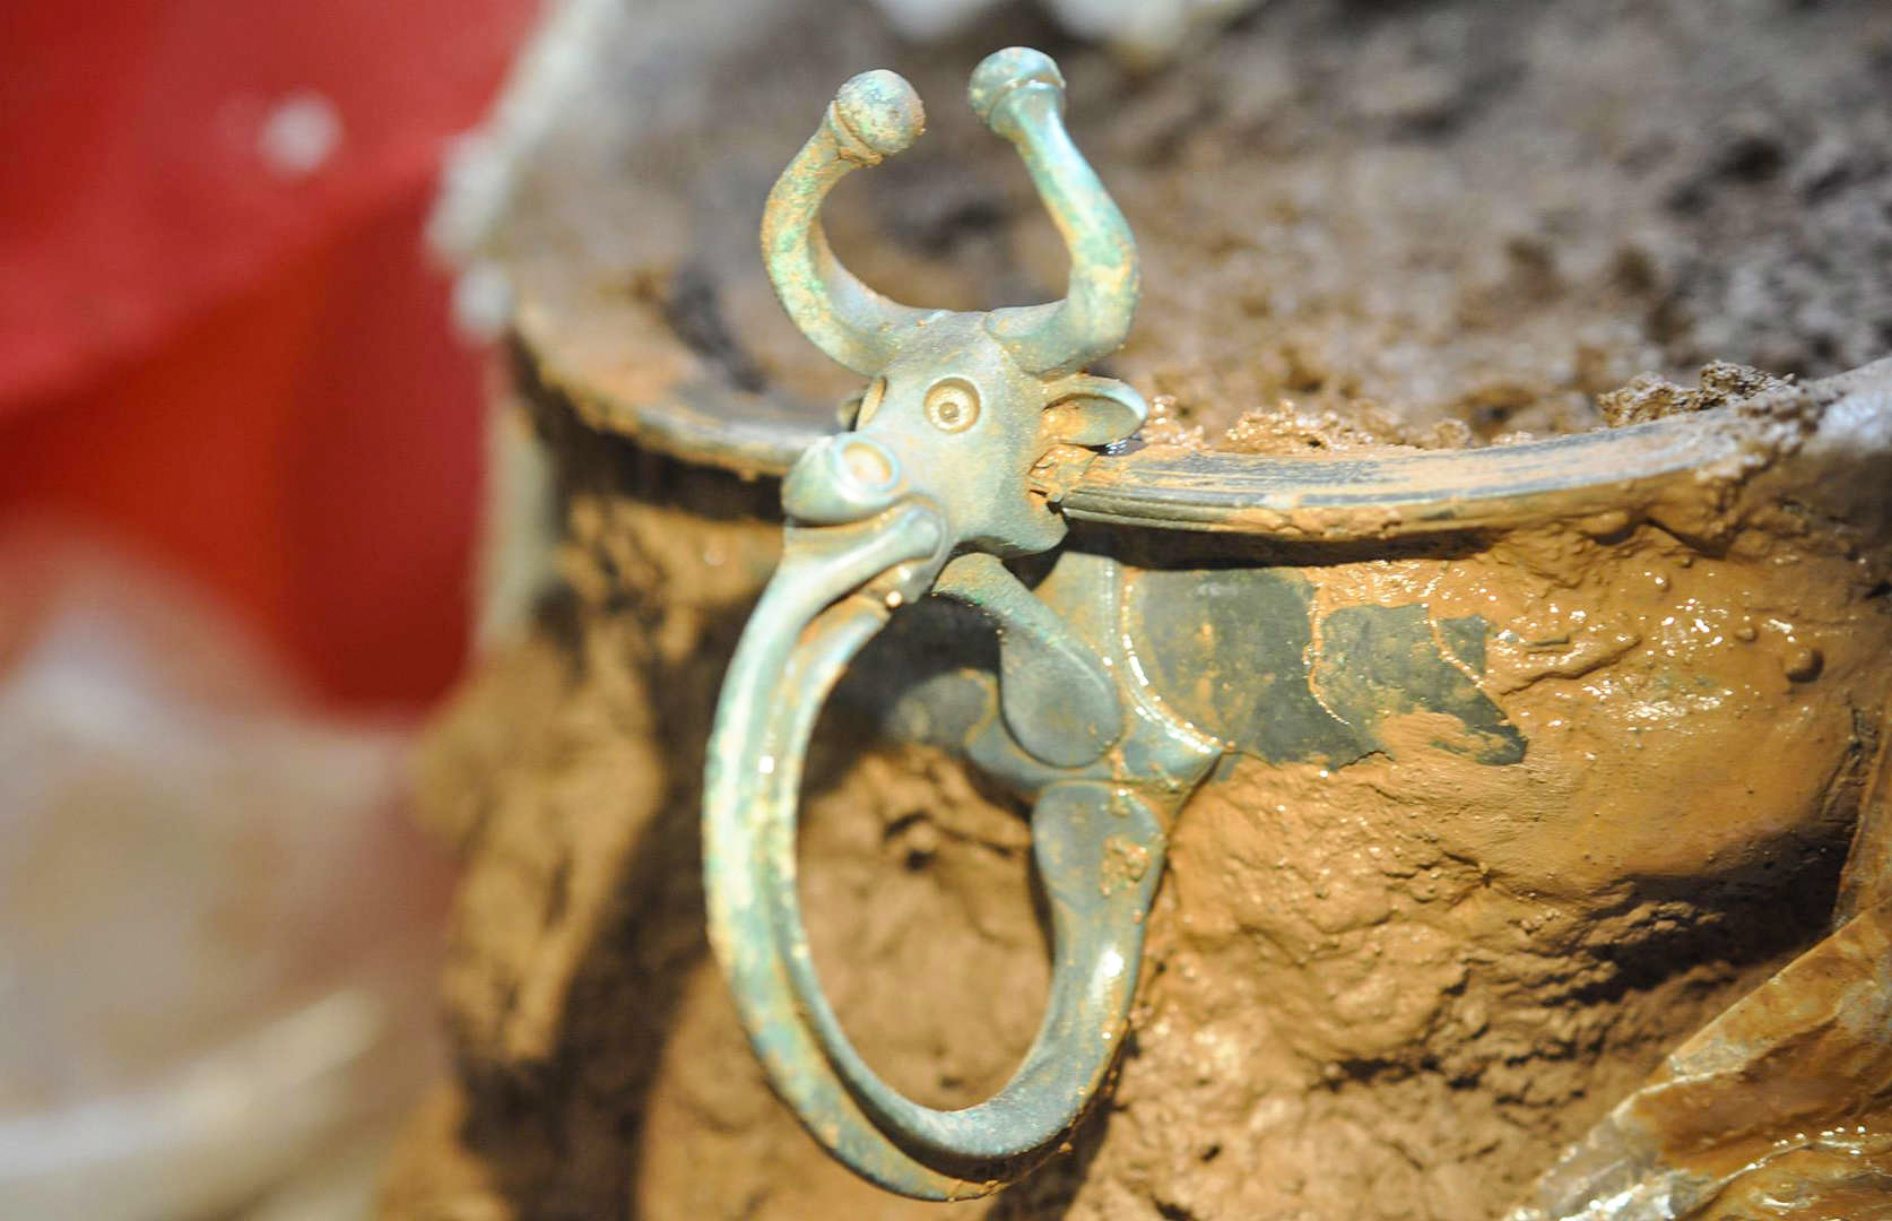 A copper alloy bowl with an adorable, cartoon-like decorative ox head escutcheon on the rim. The ox has curving horns with round caps on the ends, little ears that poke out the side of its head, large round hollow eyes and matching nostrils, with the handle protruding from its mount and curving back down to the bowl's body. The bowl is still covered in mud and packed with cling film and blue tissue.